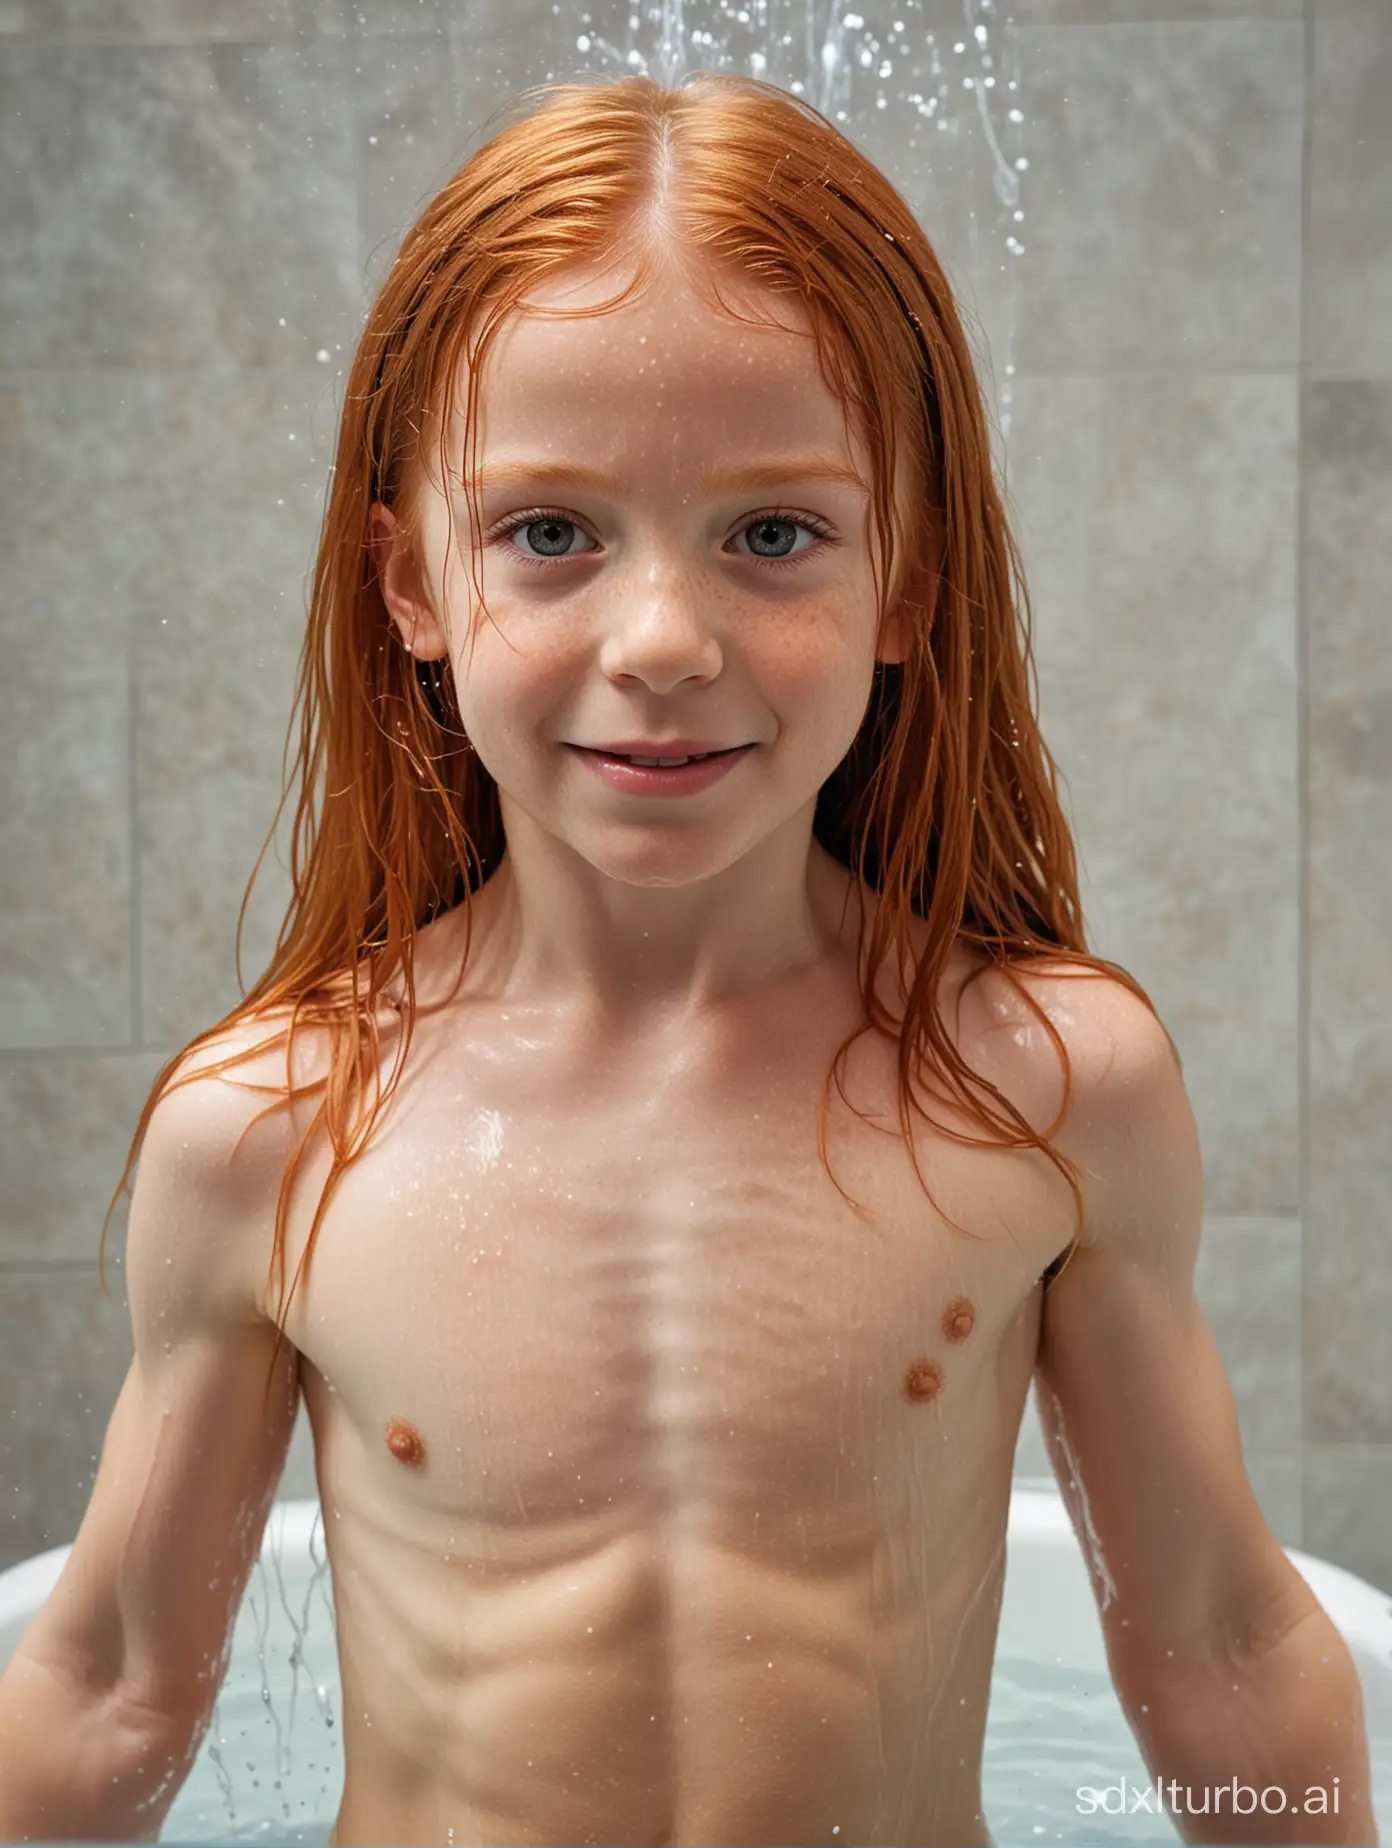 7 years old girl, long ginger hair, showing her very muscular abs, bathing, wet